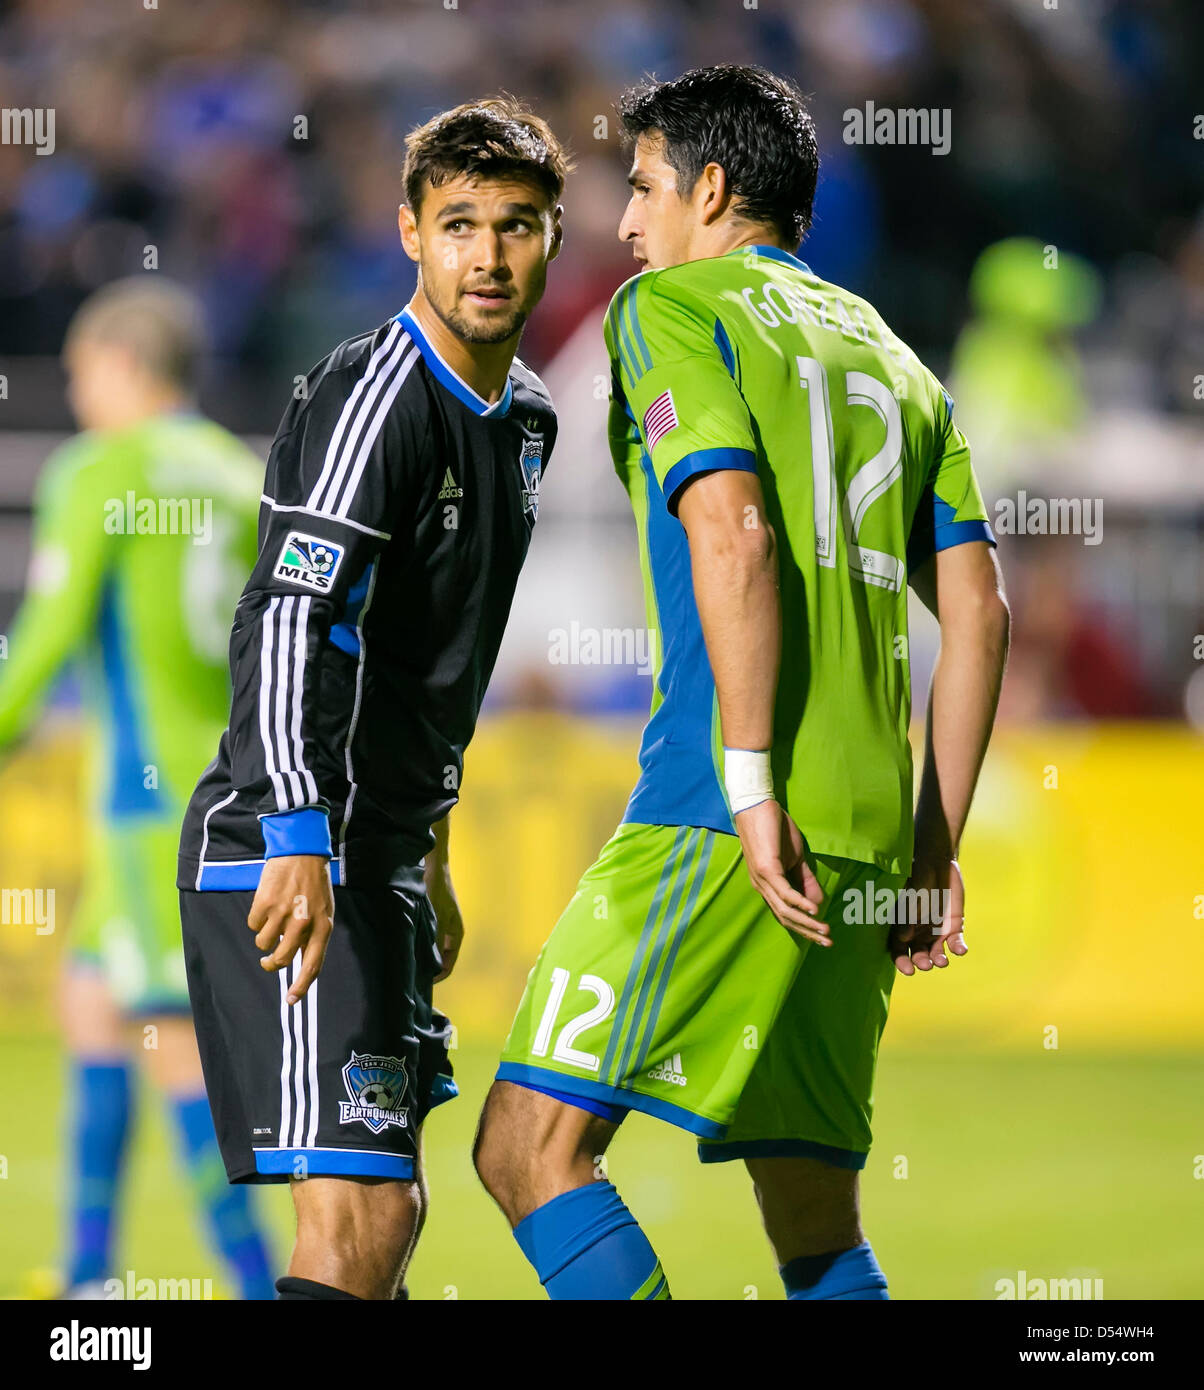 Santa Clara, California, USA. 23rd March 2013. Seattle Sounders defender Leo Gonzales (12) squares up with San Jose Earthquakes forward Chris Wondolowski (8) during the the MLS game between the Seattle Sounders and the San Jose Earthquakes at Buck Shaw Stadium in Santa Clara CA. San Jose defeated Seattle 1-0. Credit:  Cal Sport Media / Alamy Live News Stock Photo